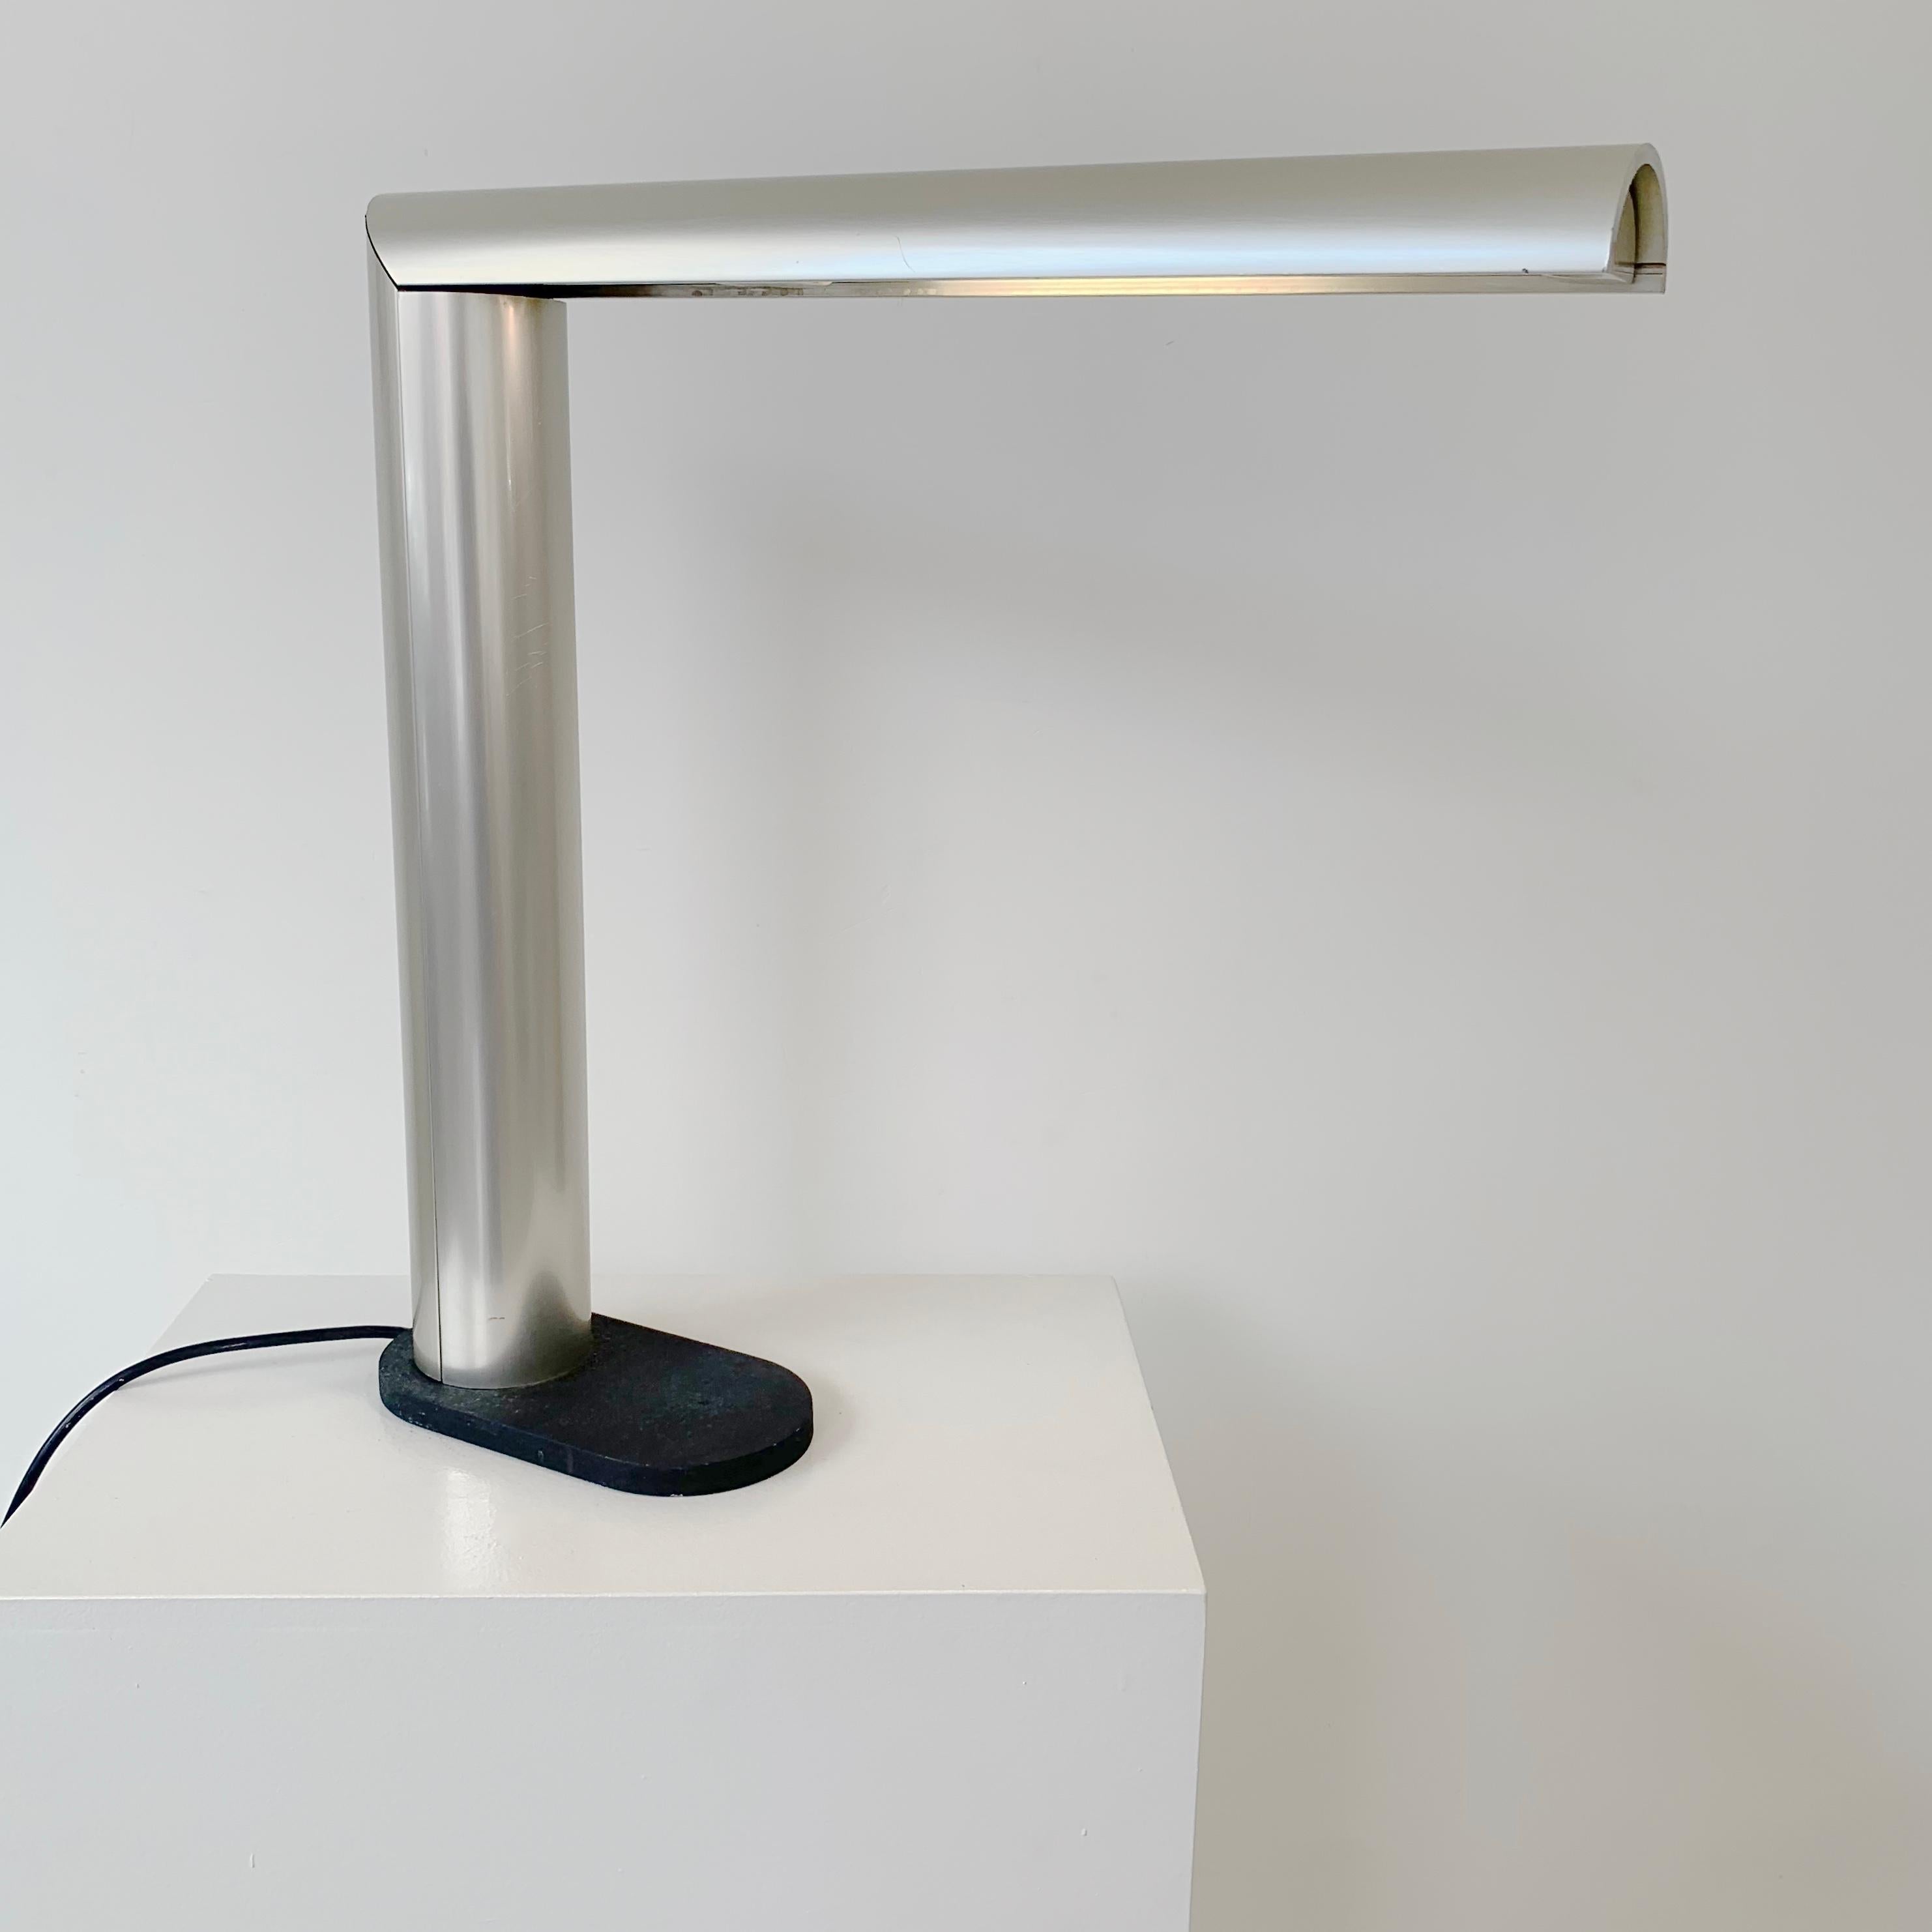 Mid-Century Modern Sabine Charoy Desk Lamp, Edition Verre Lumiere, 1981, France For Sale